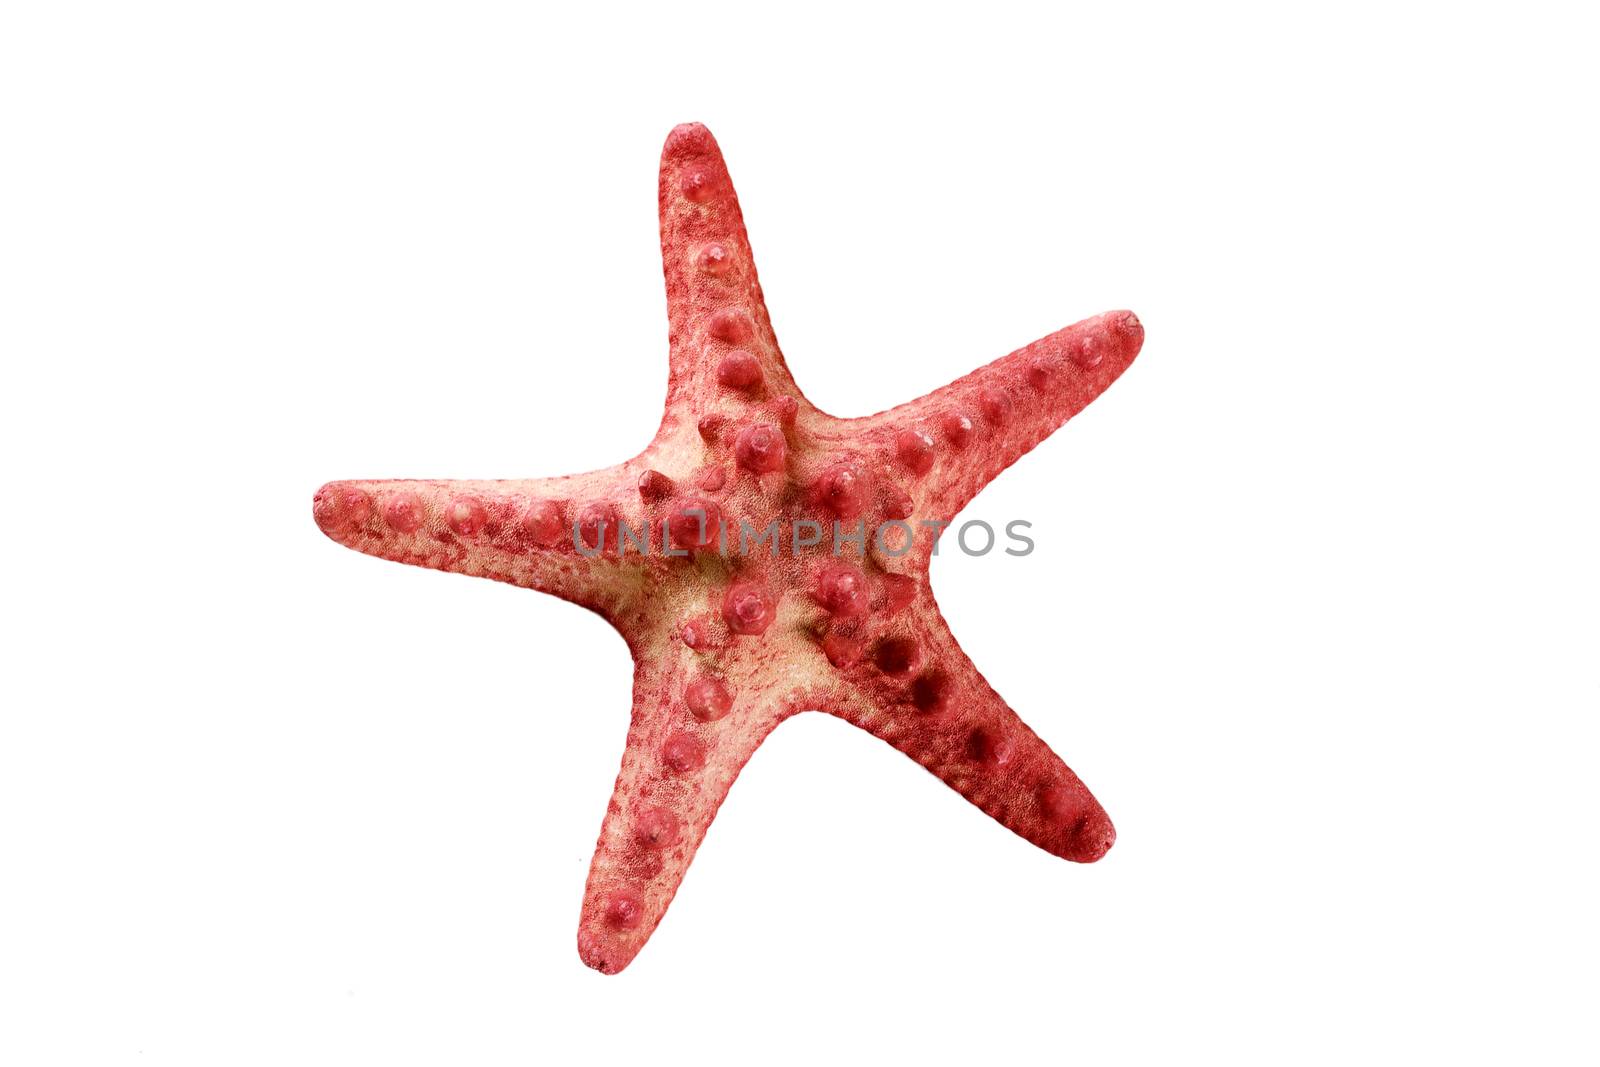 Closeup view of a reddish starfish or sea star. Class: Asteroidea. Isolated